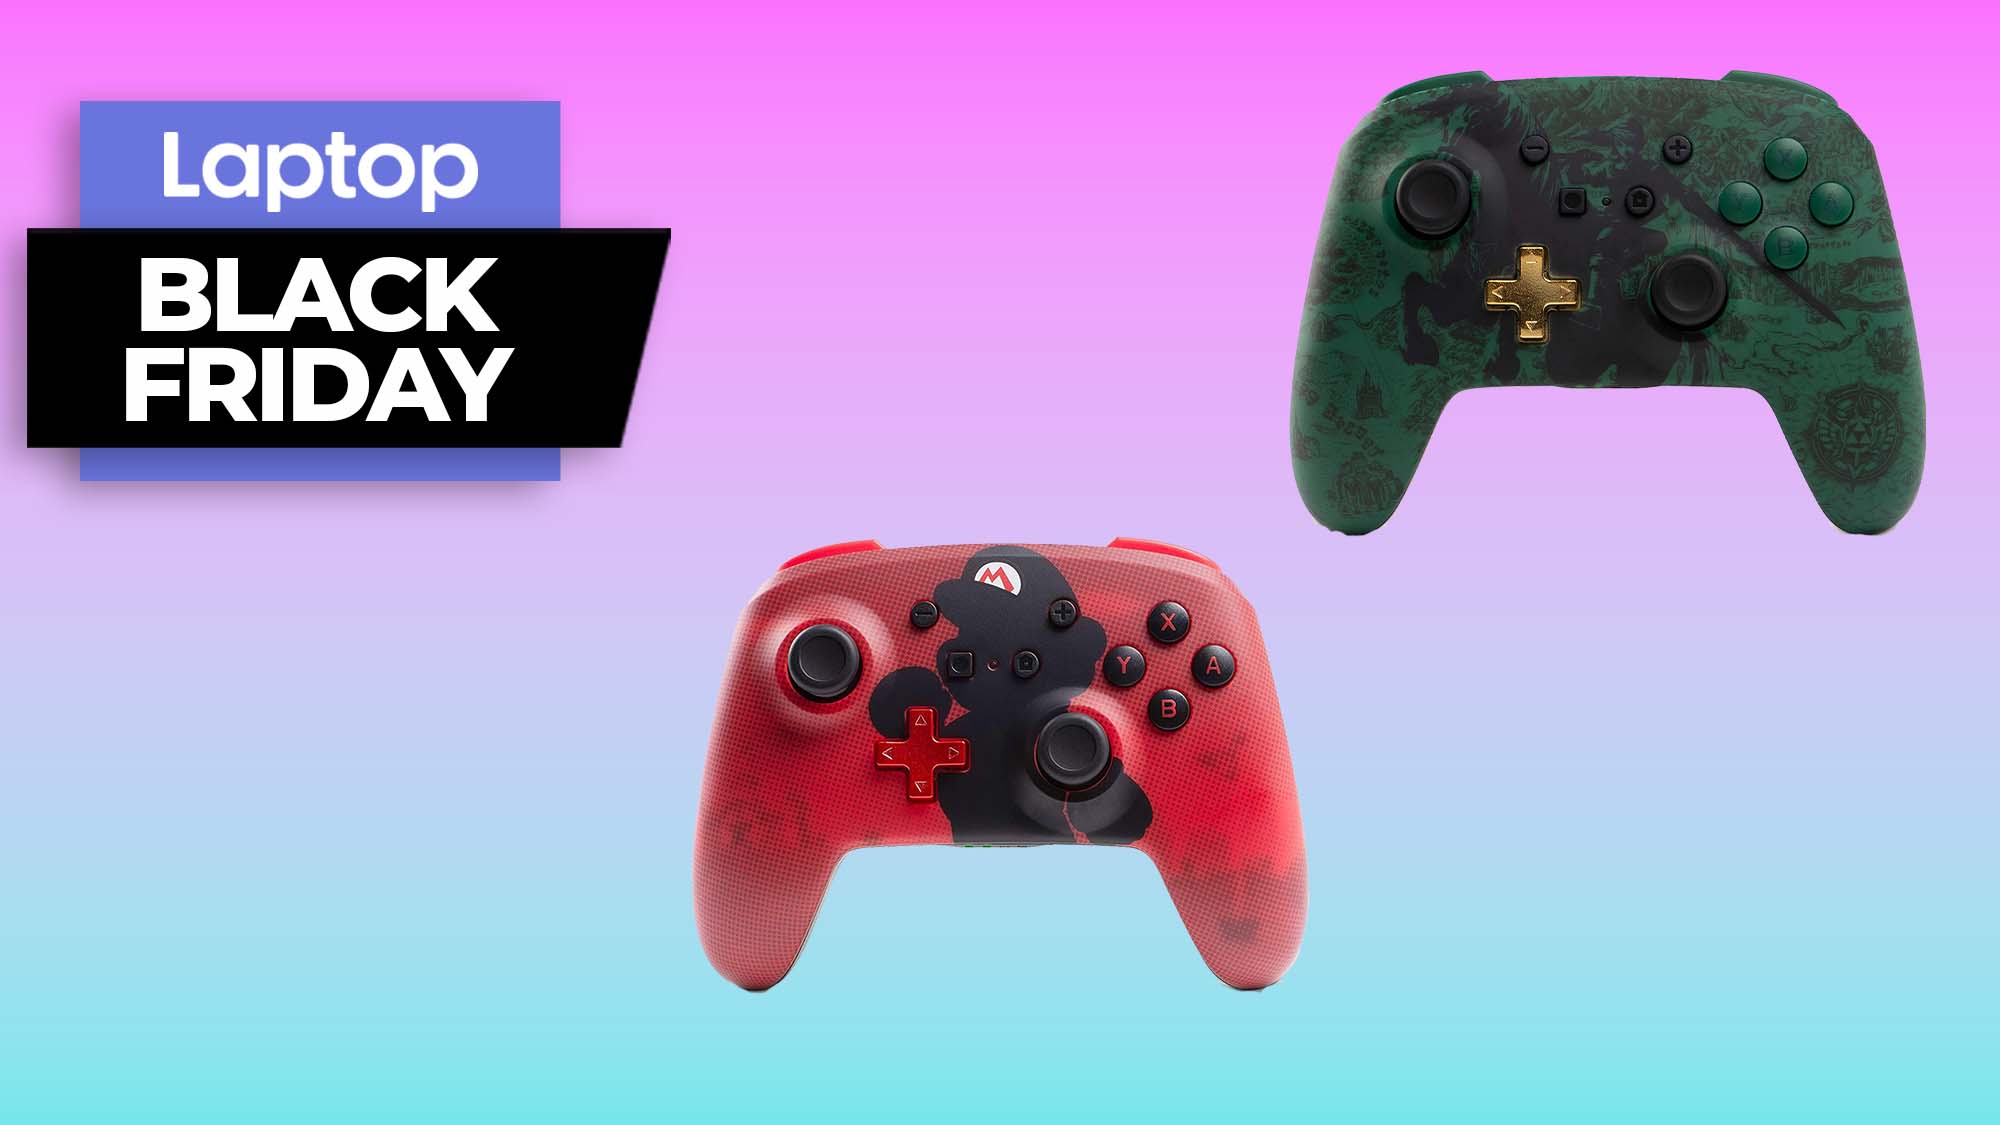 PowerA Enhanced Wireless Controllers for Nintendo Switch on a gradient background with a Black Friday laptop banner in the upper-left corner.